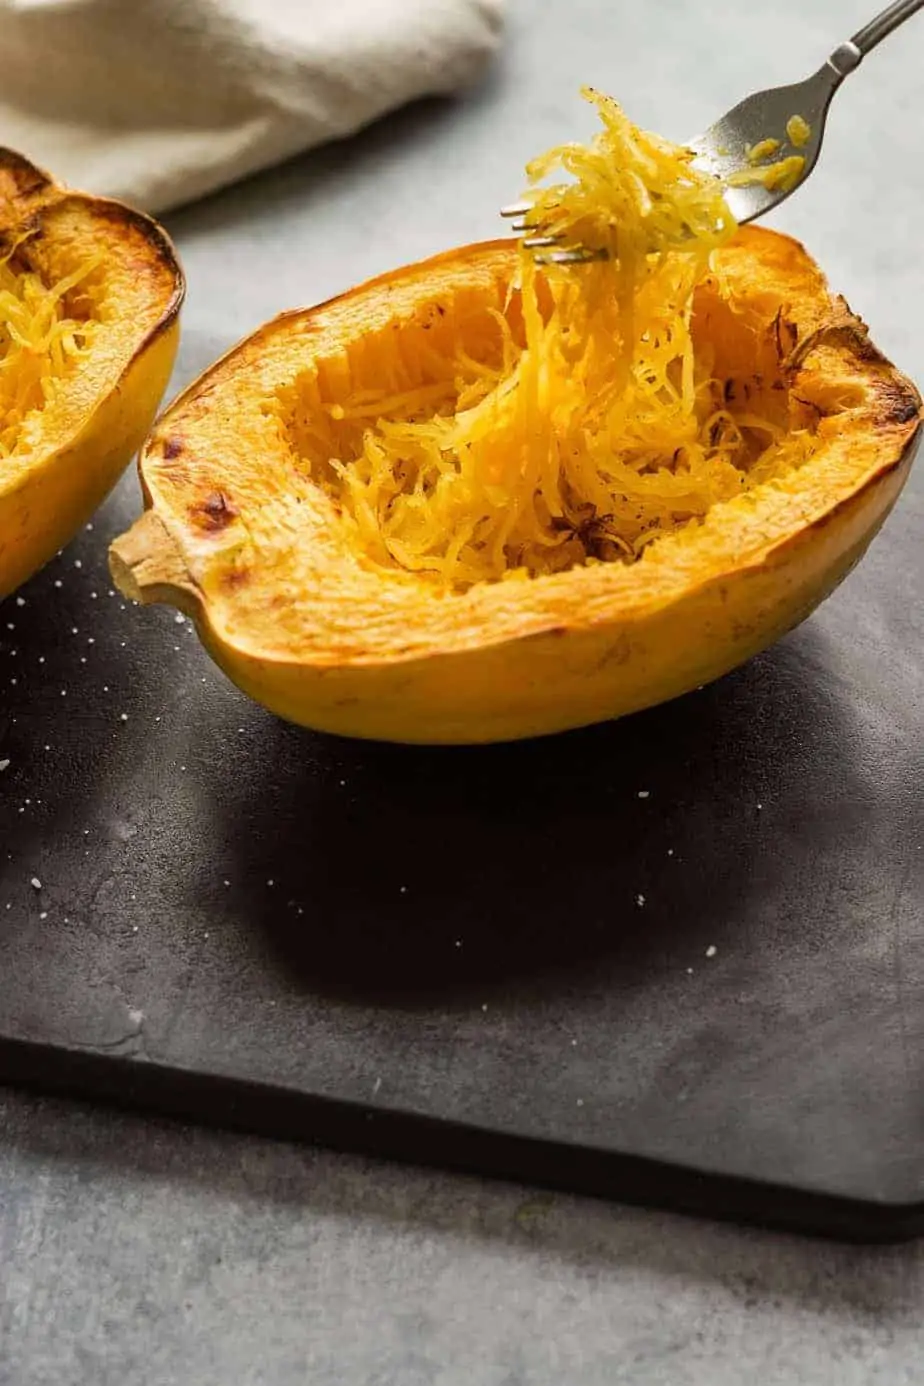 Air fryer Spaghetti squash holding the noodles with a fork.